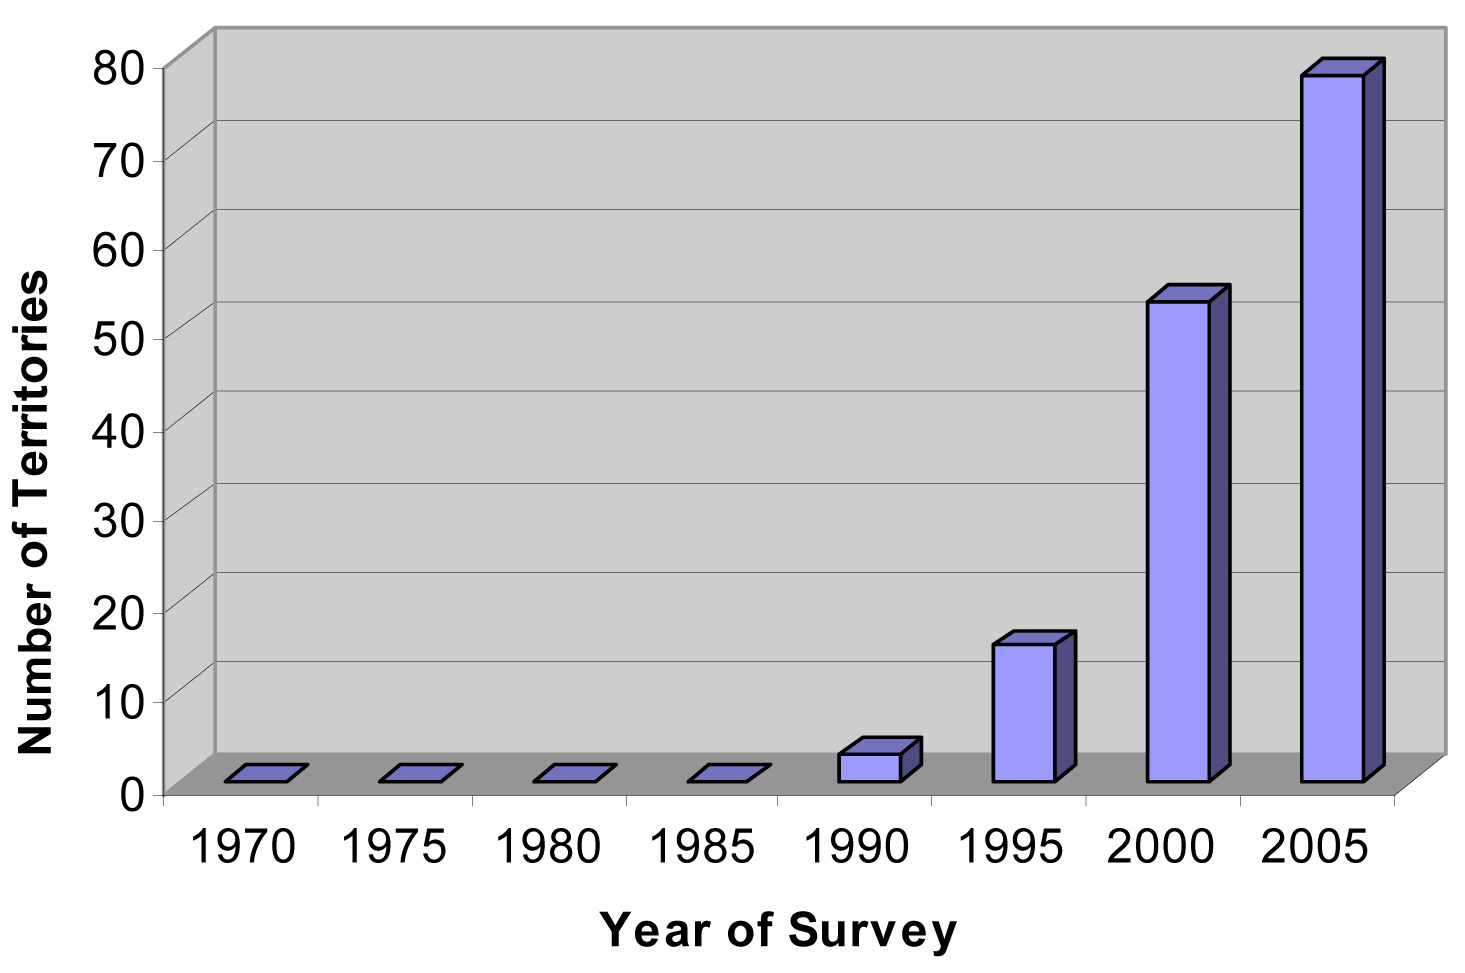 Figure 1: Bar graph showing an increase in the number of occupied Peregrine Falcon territories in Ontario, based on five year surveys, 1970-2005.